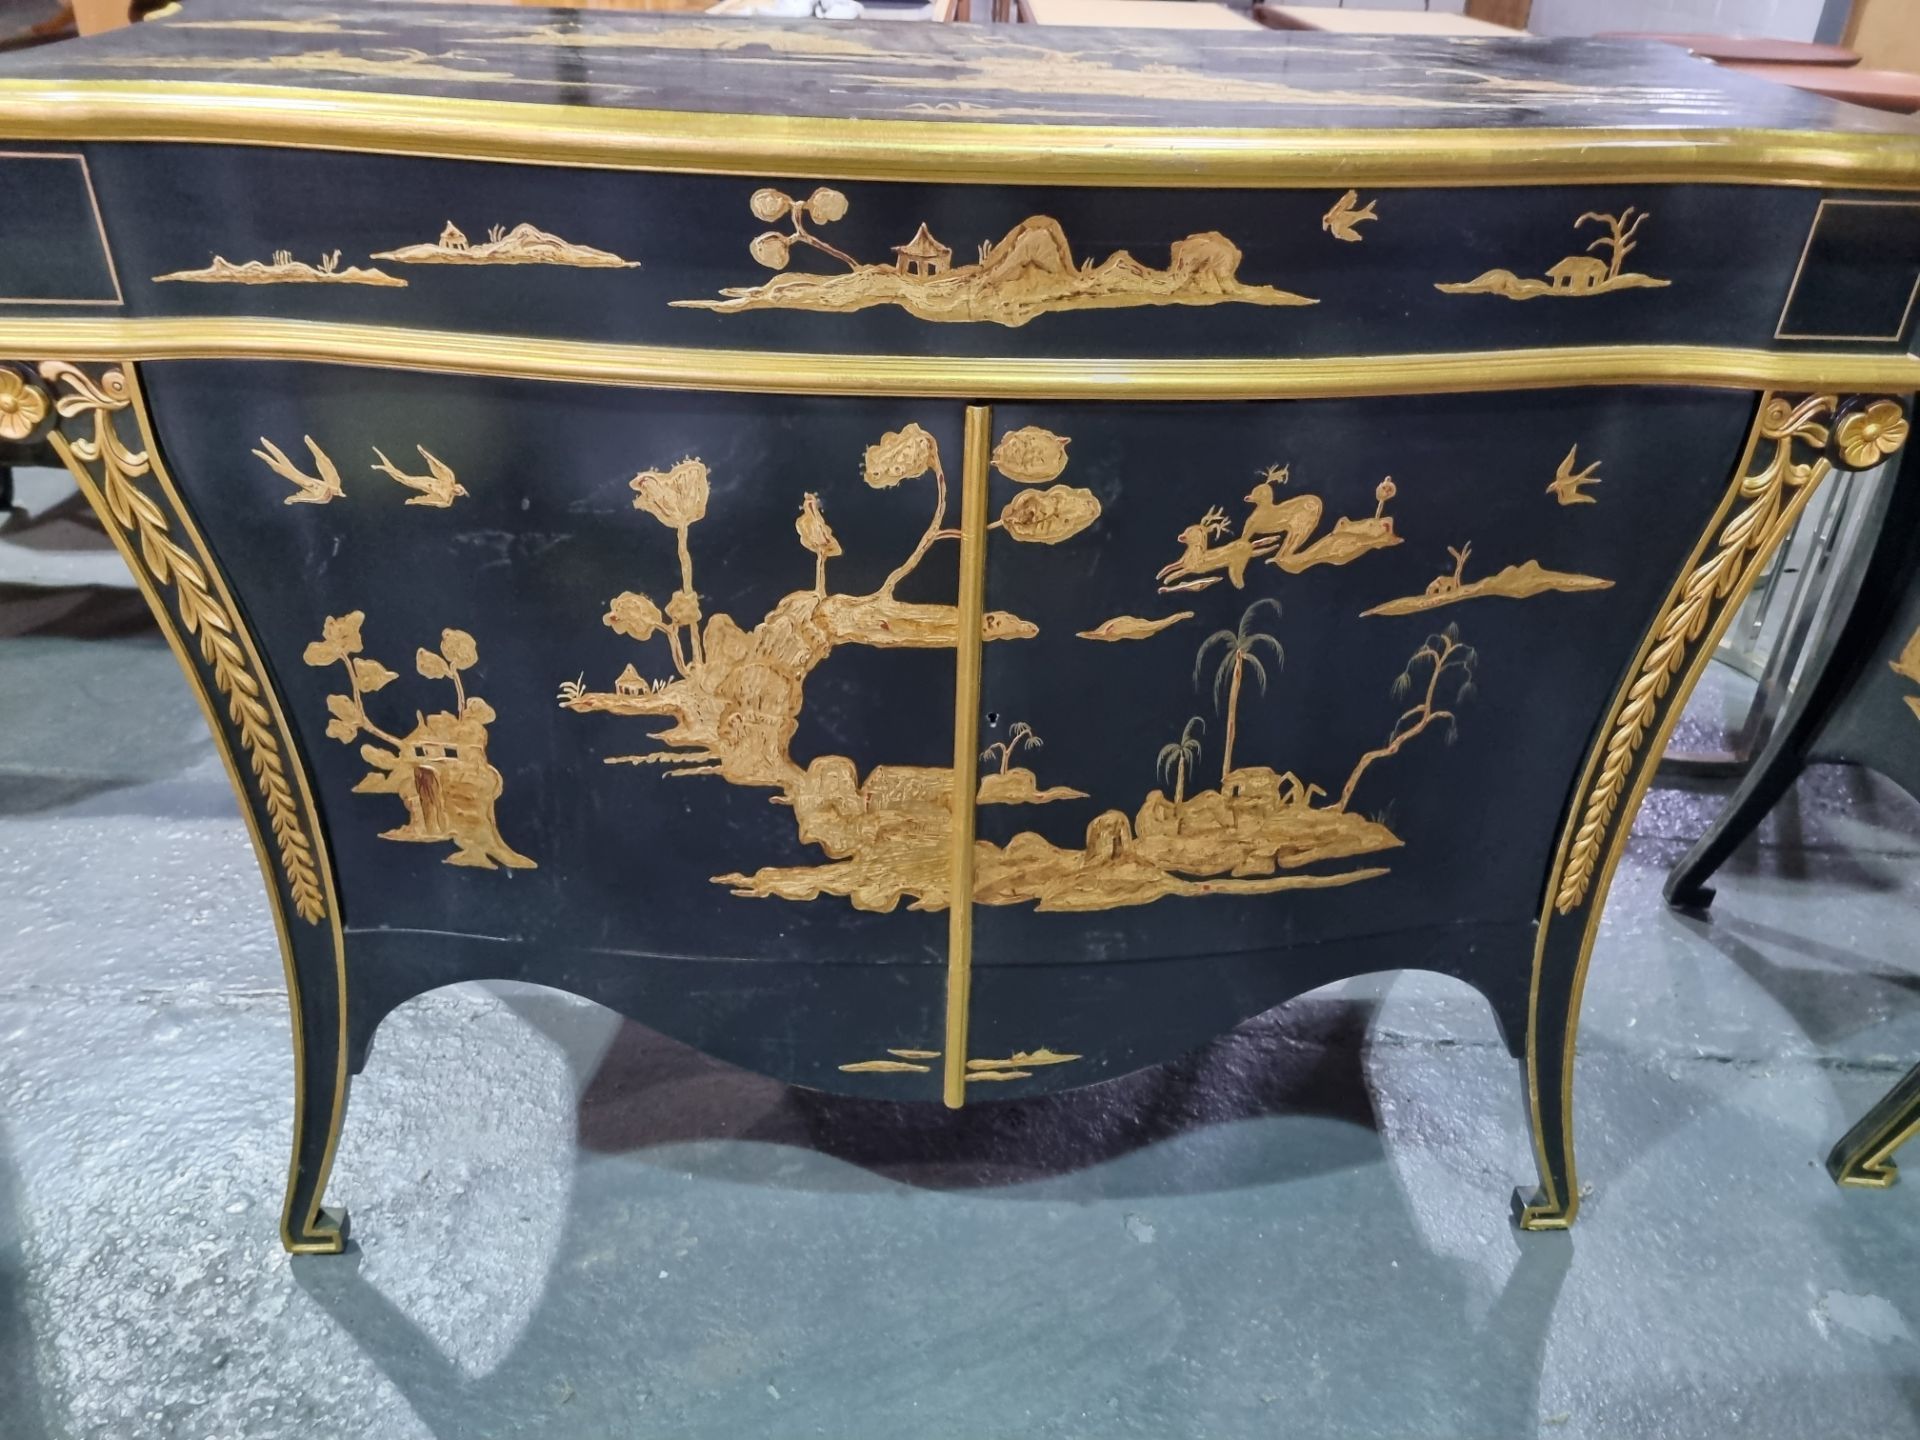 A pair of Chinese export Black Japanned lacquer Finish commodes decorated with a animal scenery in a - Image 4 of 8